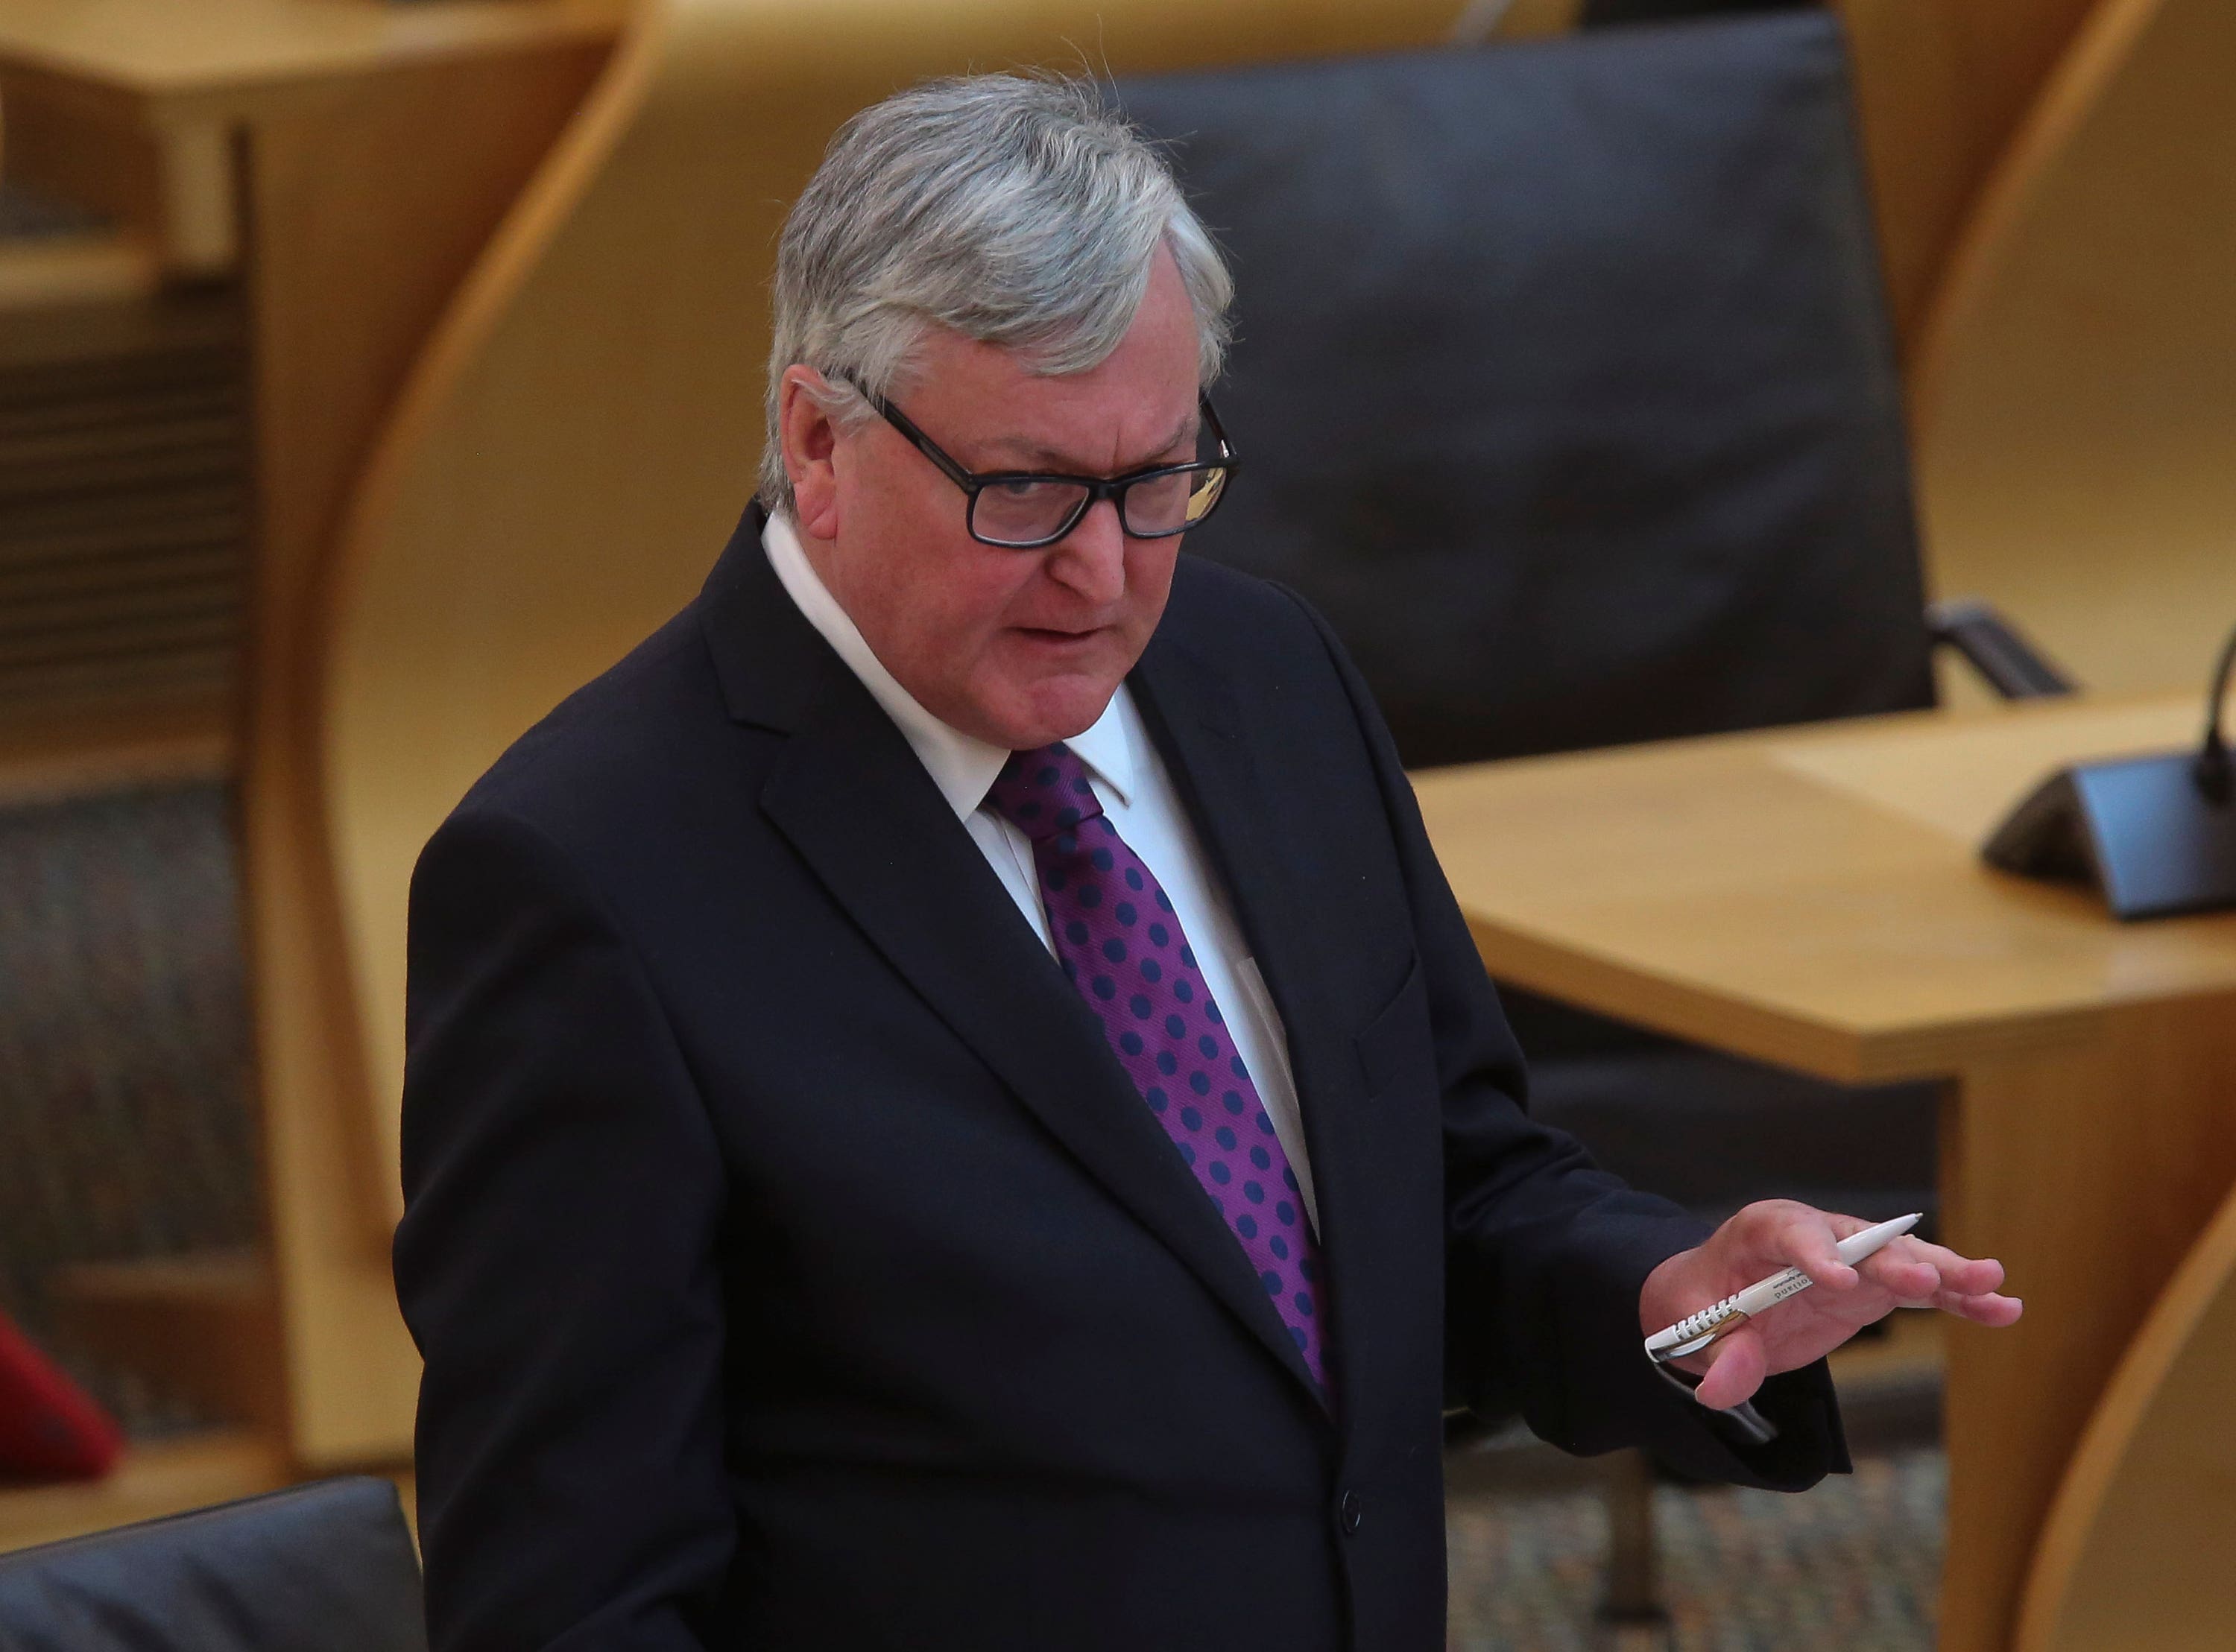 Former minister Fergus Ewing has been perhaps the loudest voice against the agreement.